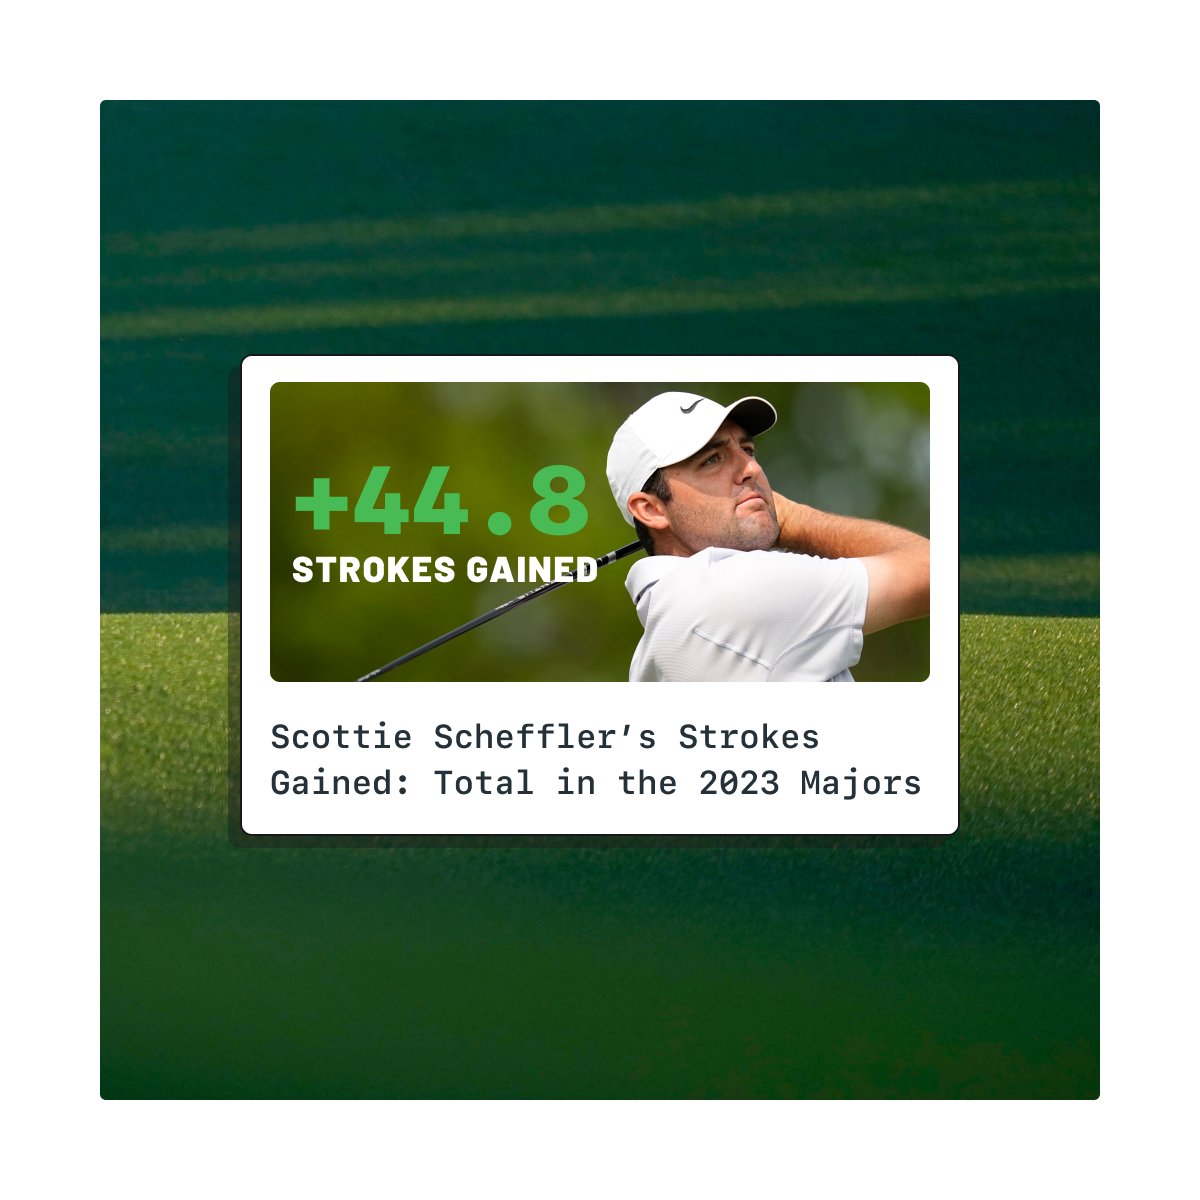 The men's major championship season is behind us, and, somewhat unsurprisingly, the No. 1 player in the World, Scottie Scheffler, performed the best from a strokes gained perspective across all four majors.

Scotties' +44.8 SG: Total was +2.1 strokes better than Viktor Hovland,… https://t.co/rRV7a3zYW1 https://t.co/xcnKiEEwns